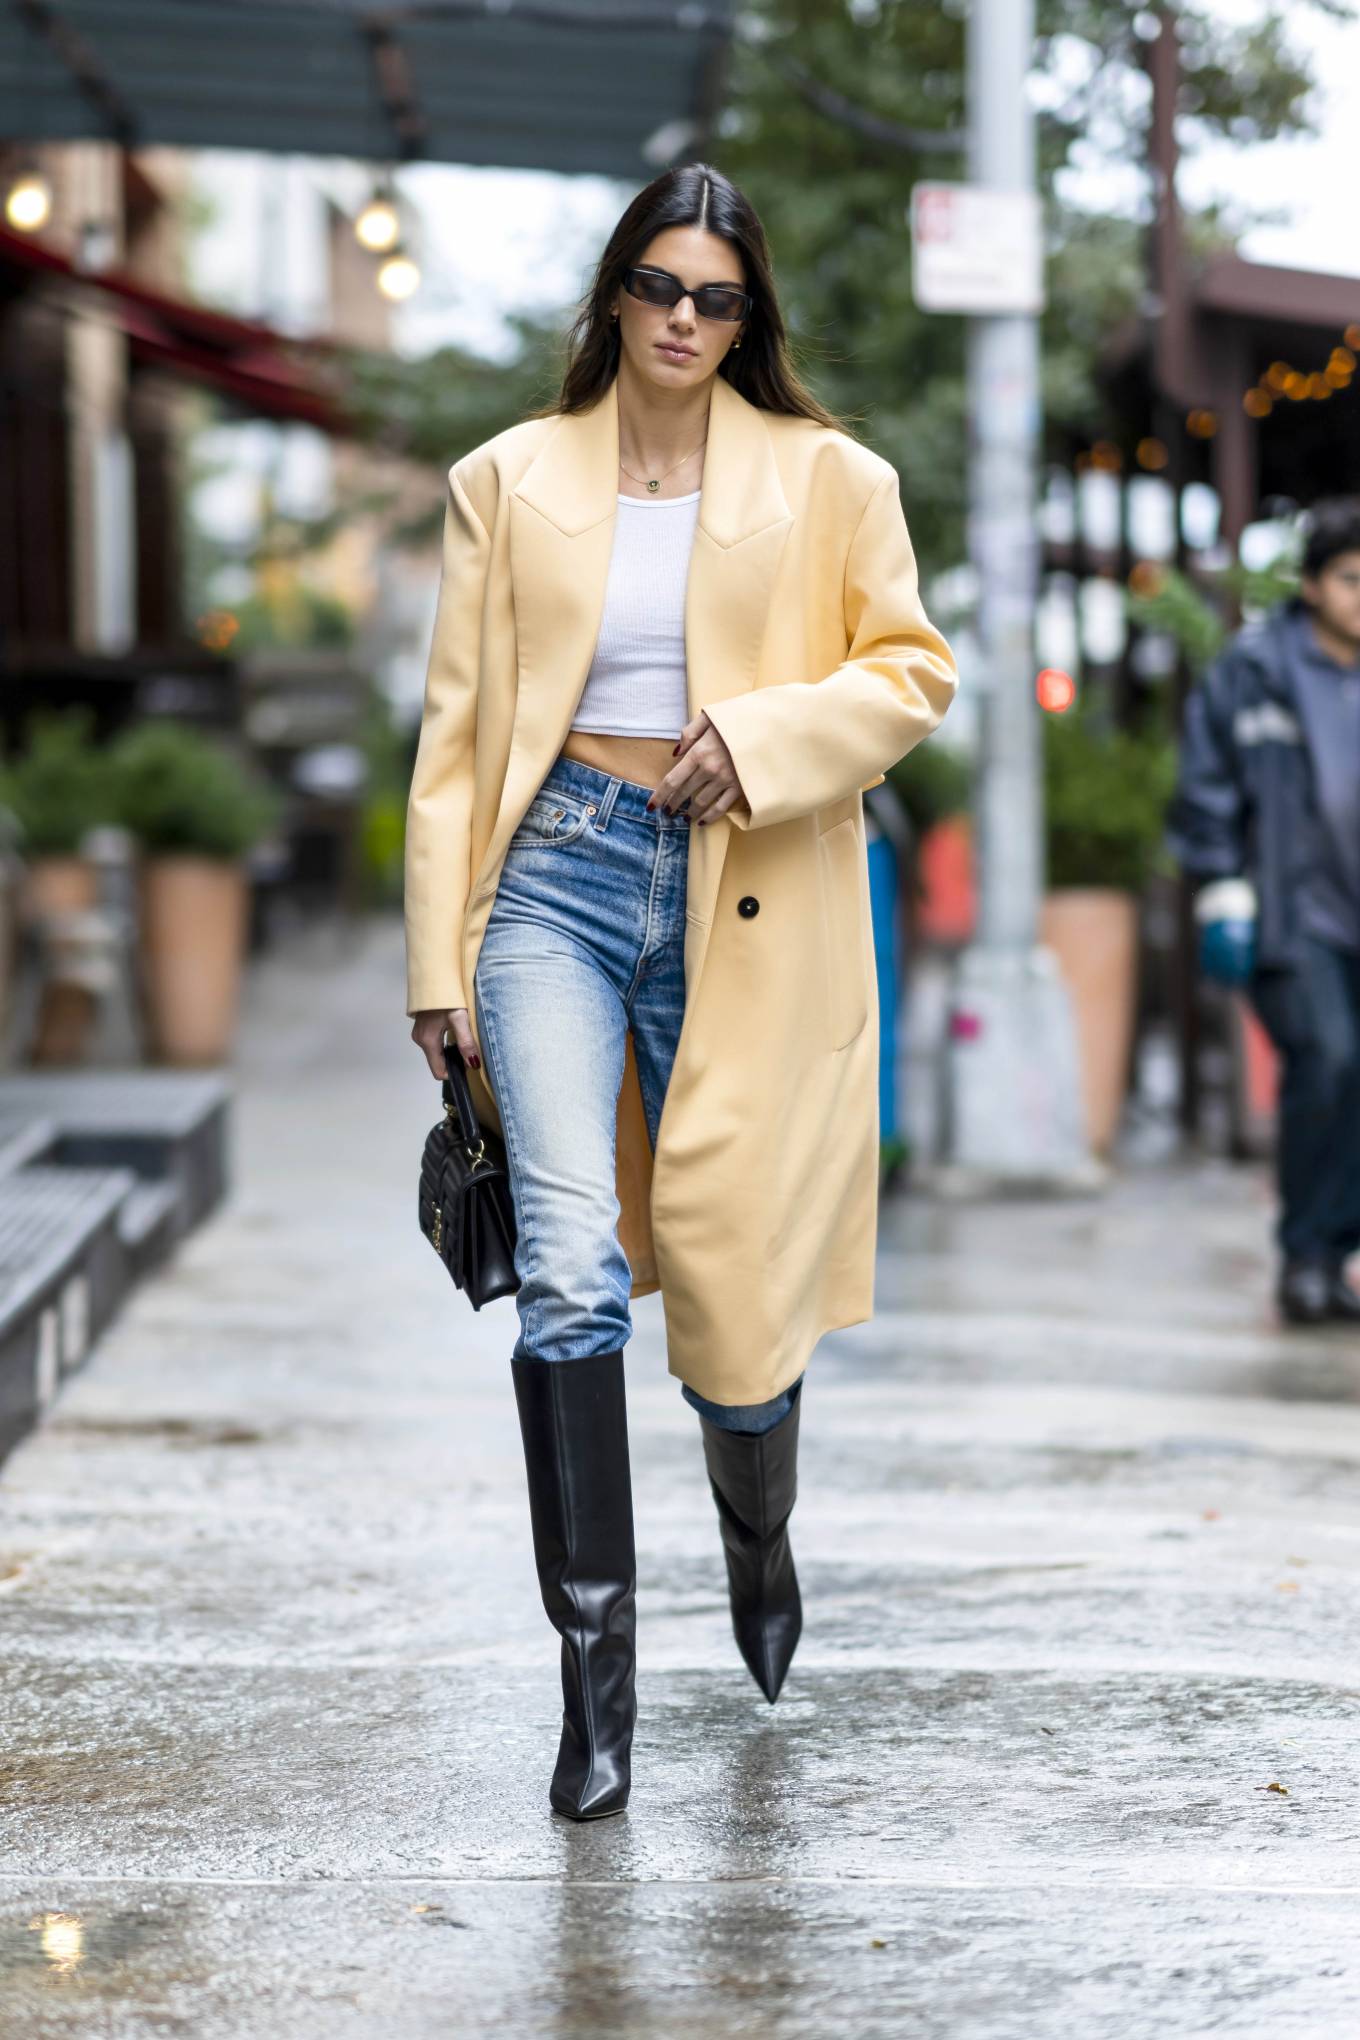 Kendall Jenner 2022 : Kendall Jenner – Out in New York-07